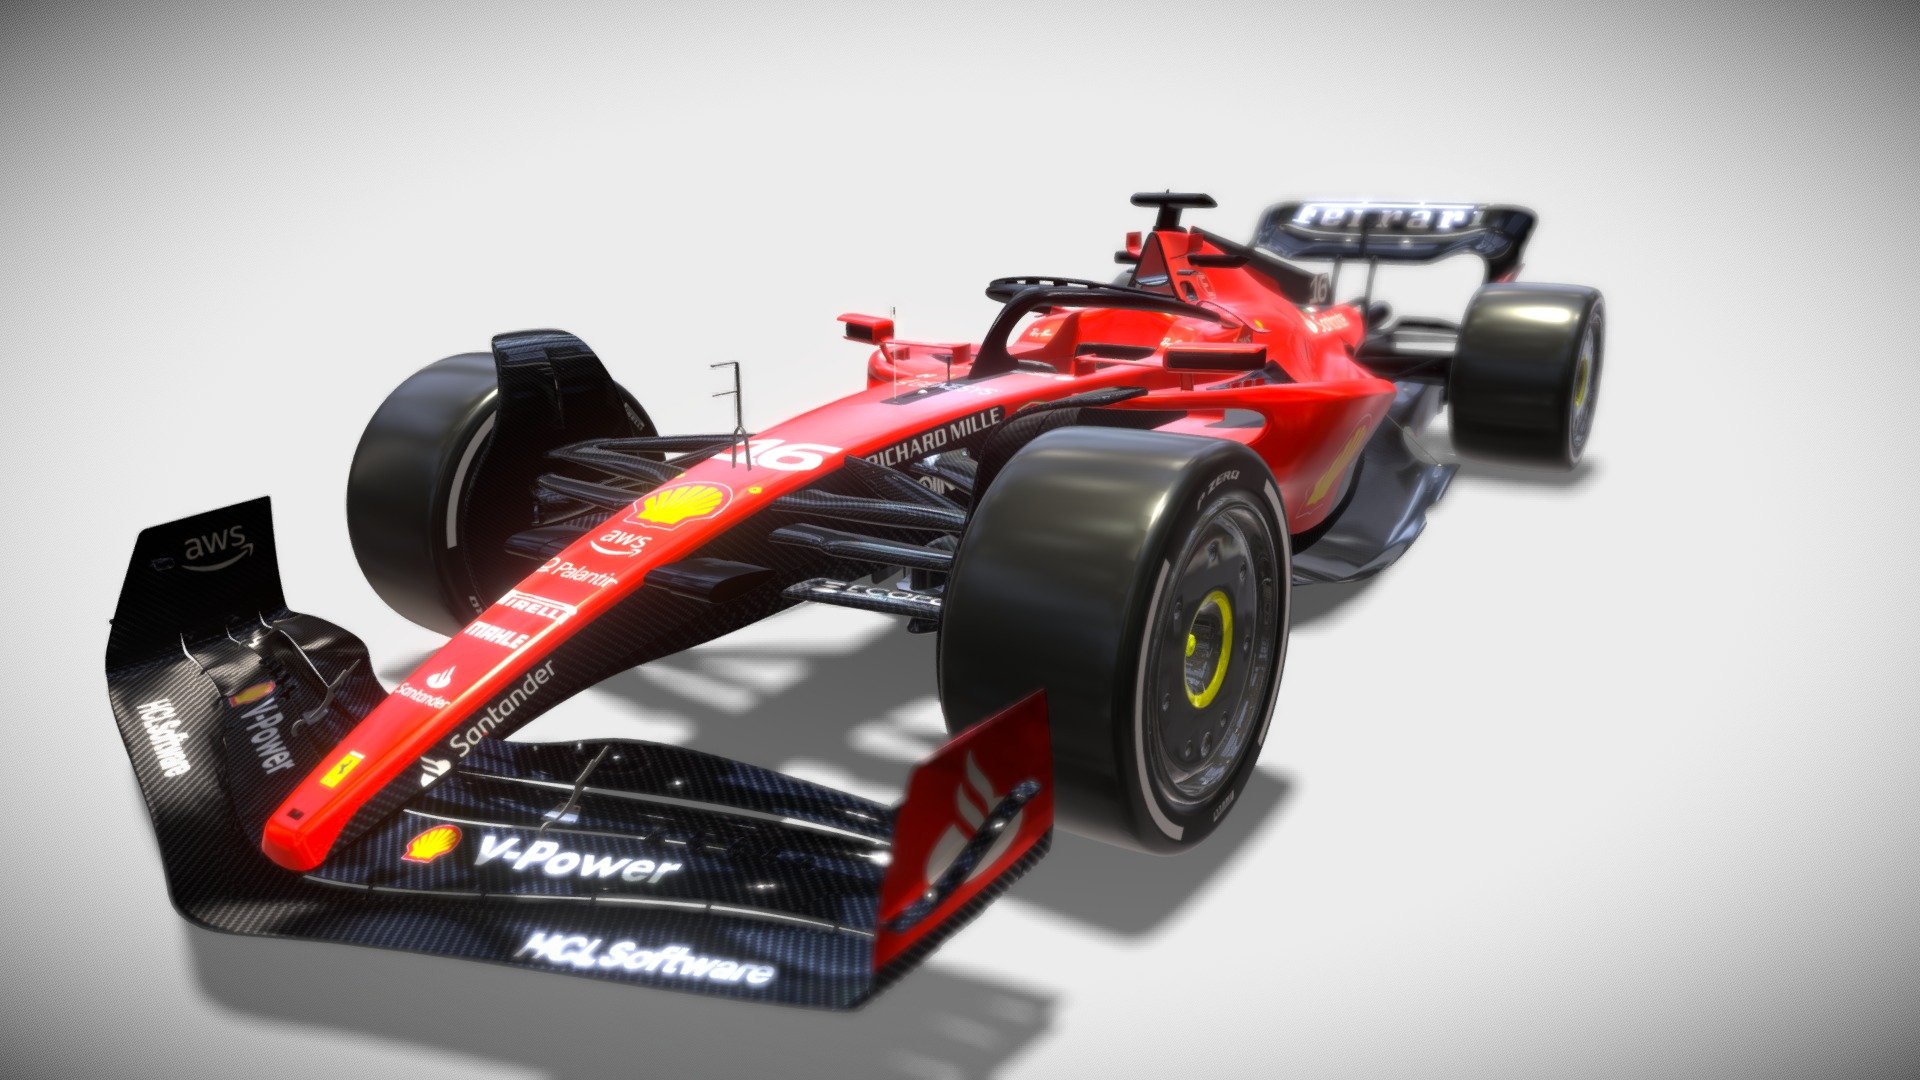 3D model of the Ferrari's F1 car for the 2023 season. 
The model, created in Solidworks and subsequently imported in Blender for the material and texture generation, represents the current car with a high degree of fidelity in details and dimensions. Components such as wheels and tires are removable and interchangable 3d model